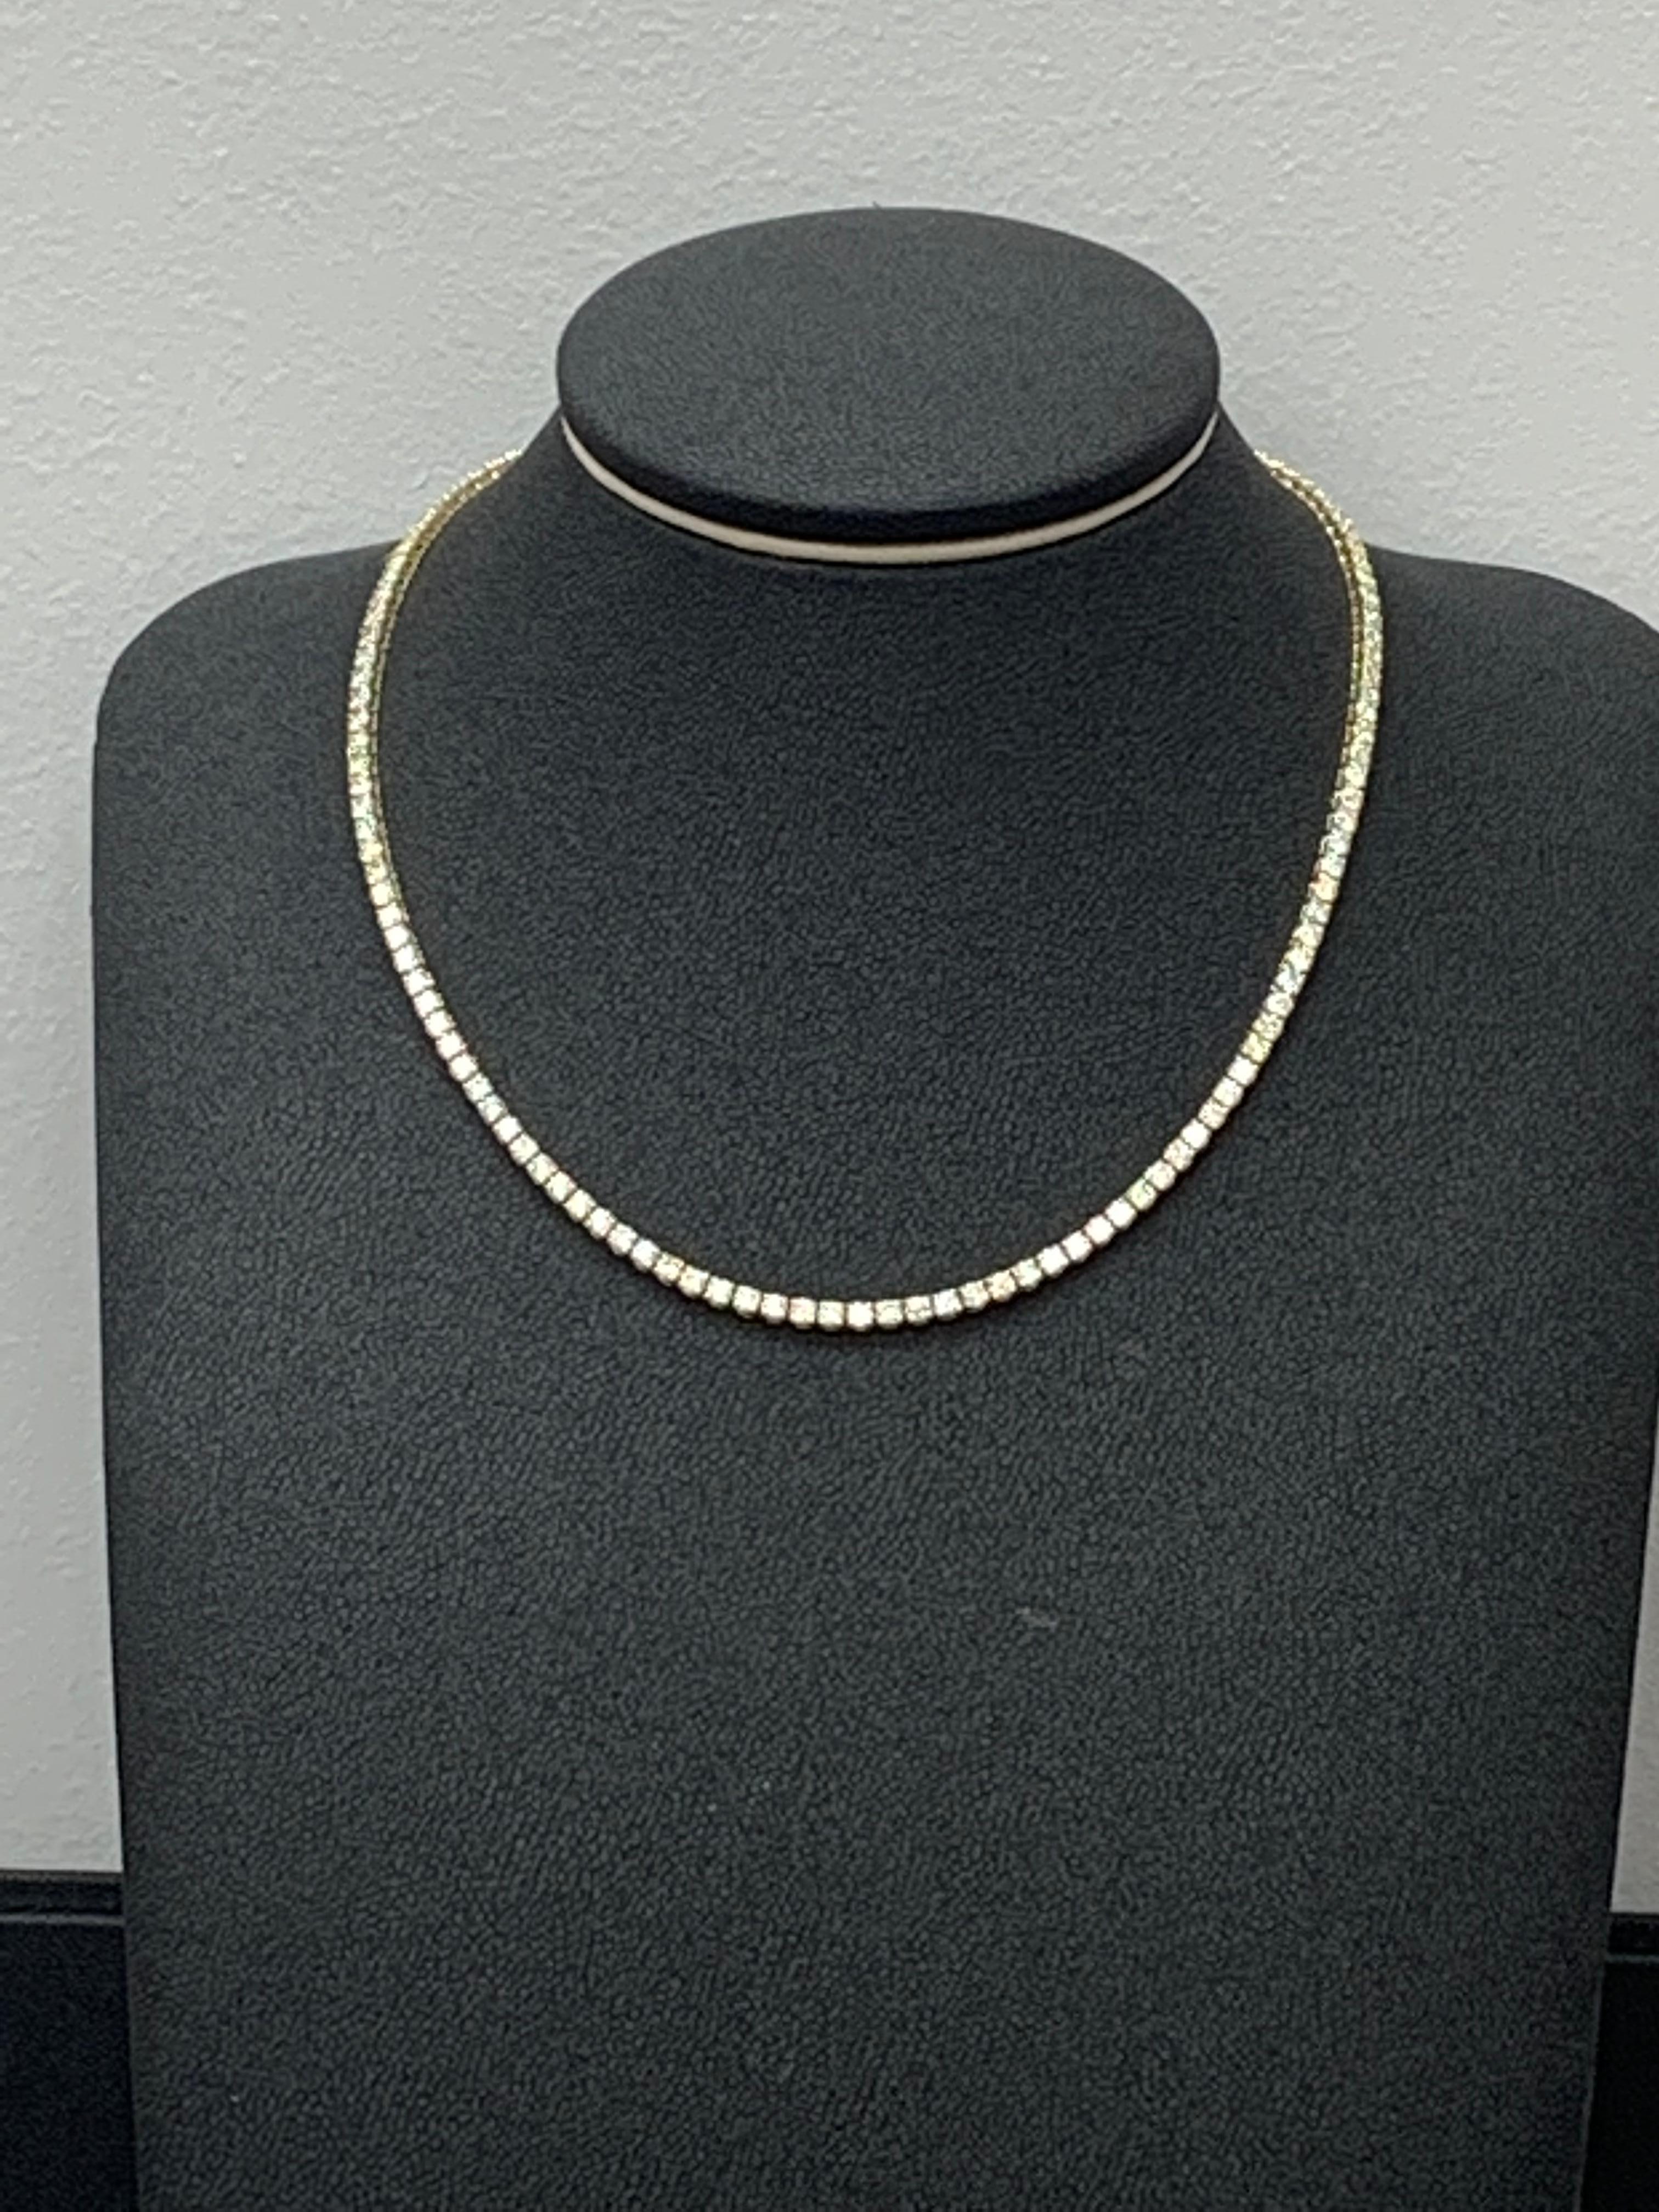 13.01 Carat Diamond Tennis Necklace in 14K Yellow Gold For Sale 10